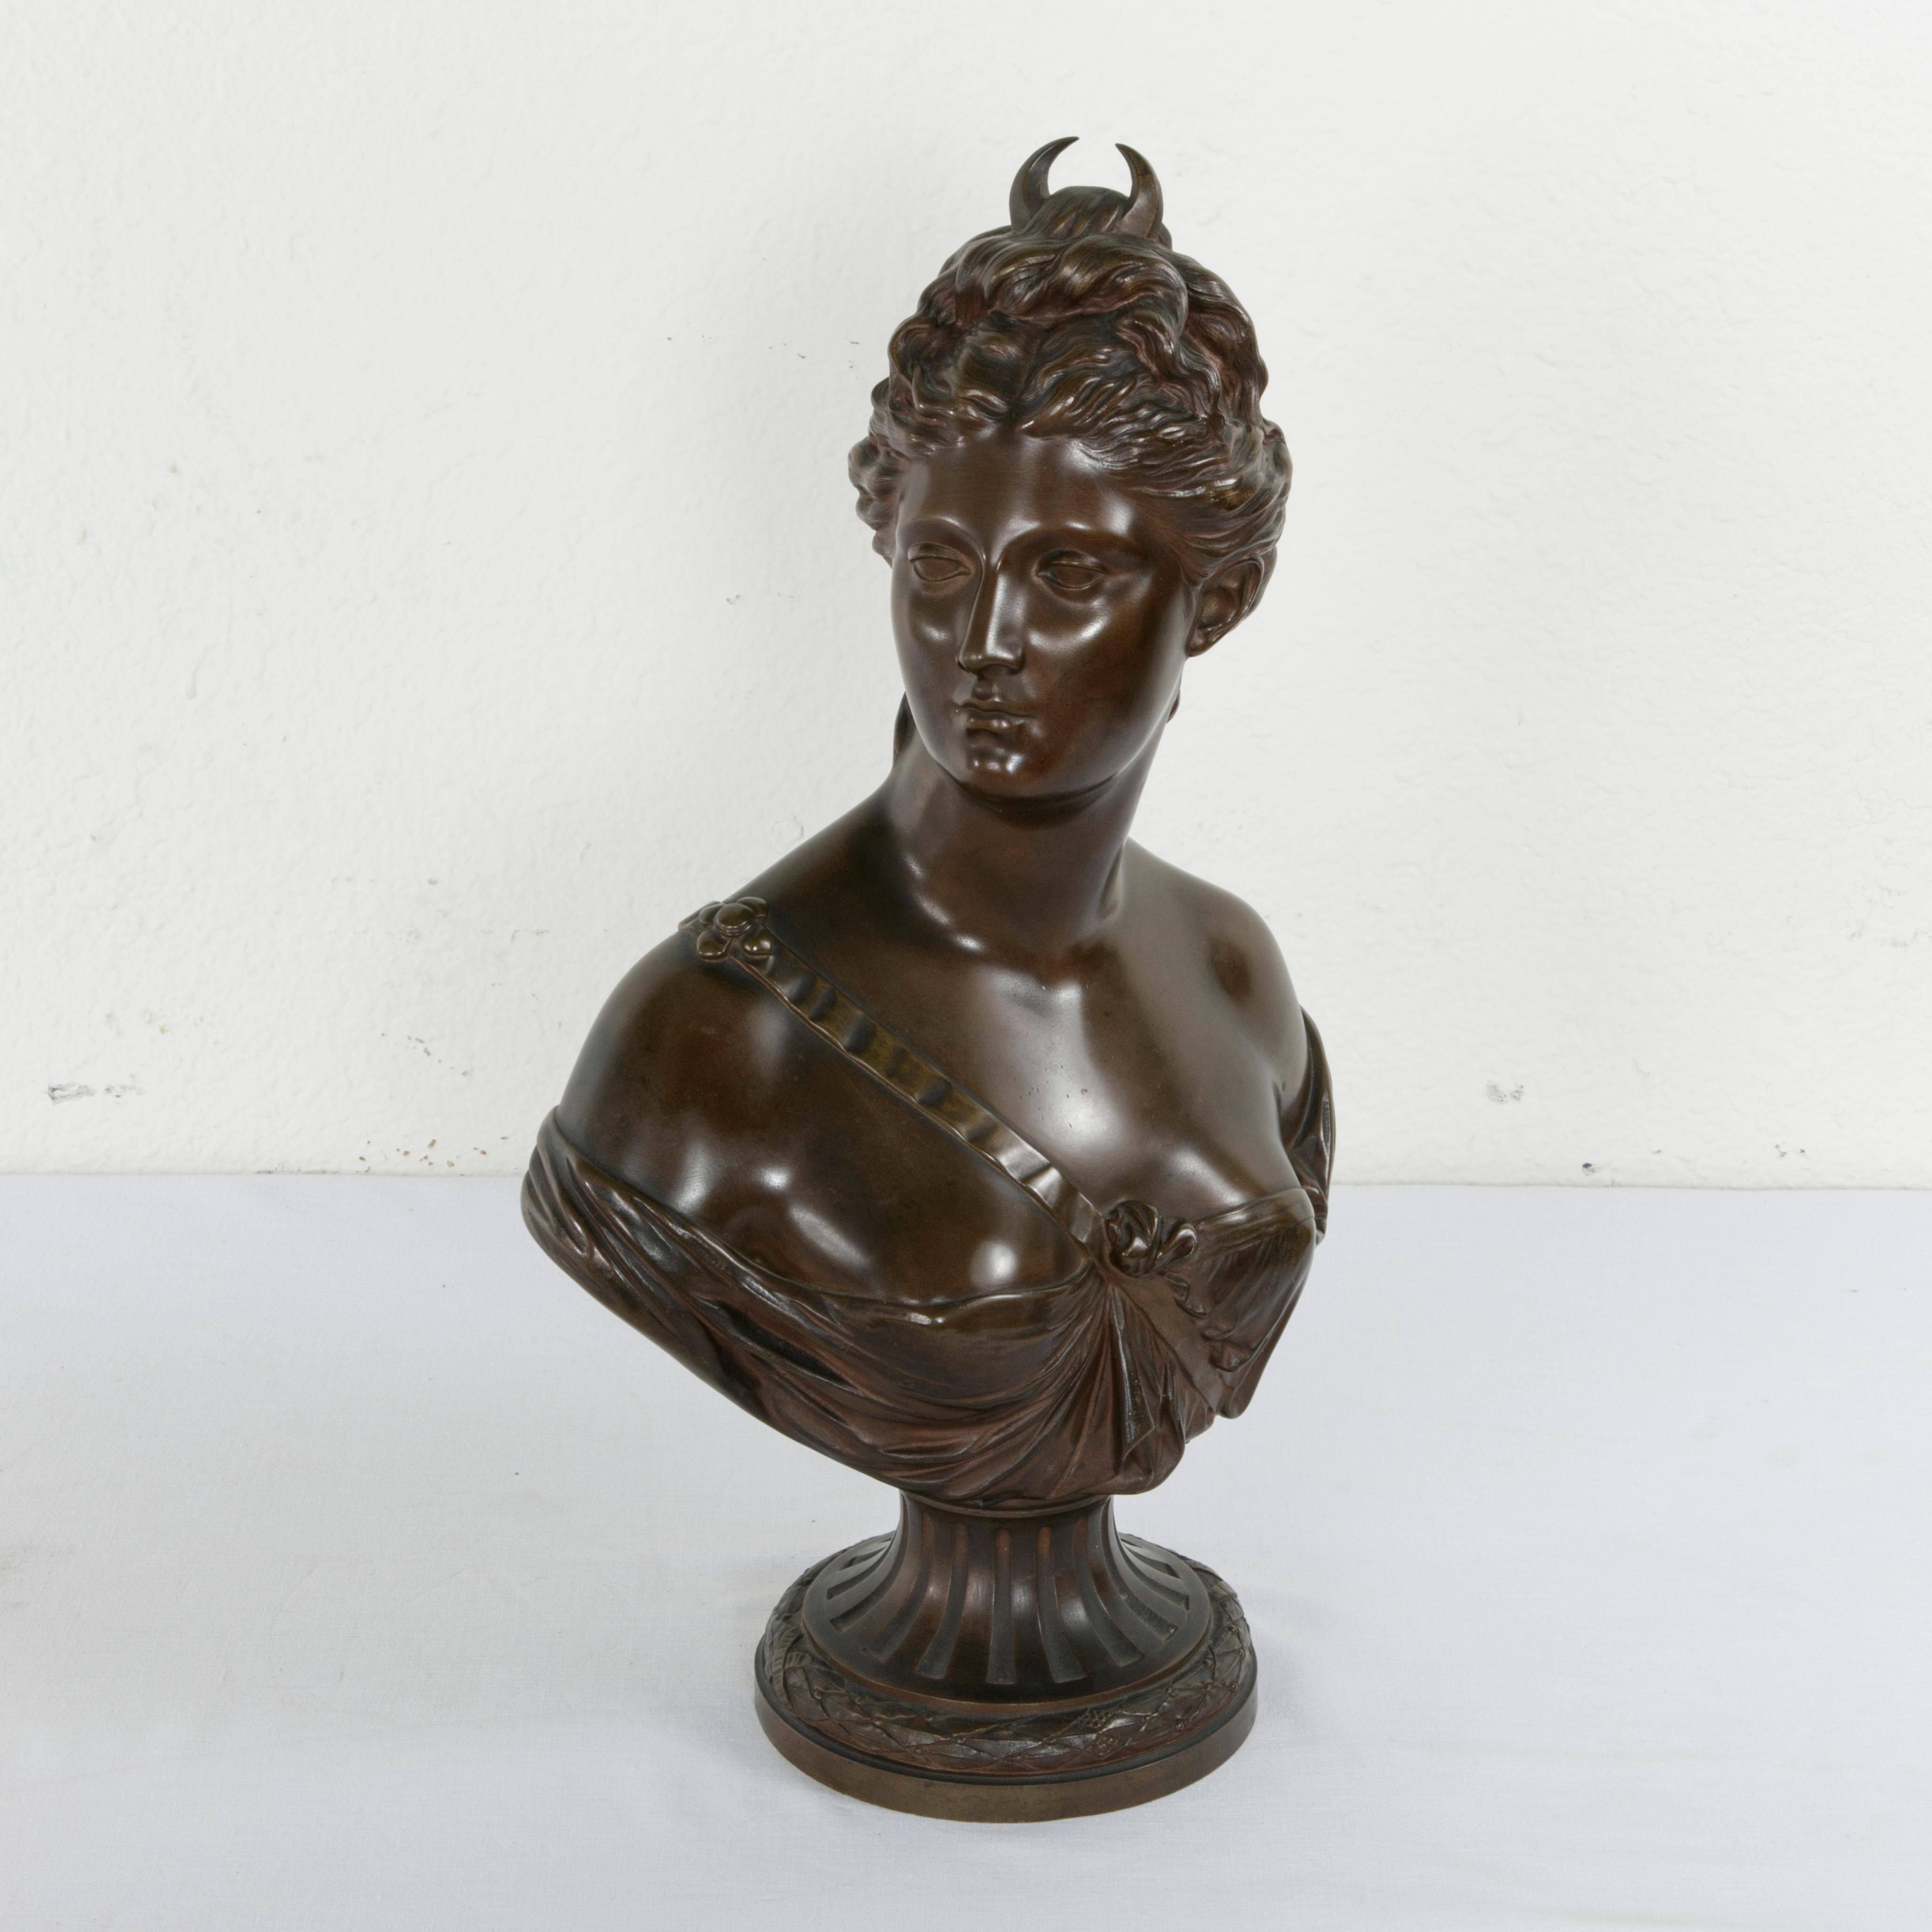 This turn of the 20th century French bronze bust of Diana, the Roman goddess of the moon and of the hunt, is a piece after the eighteenth century French neoclassical sculptor Jean-Antoine Houdon (1741-1828), and is marked Houdon 1767 on the back.